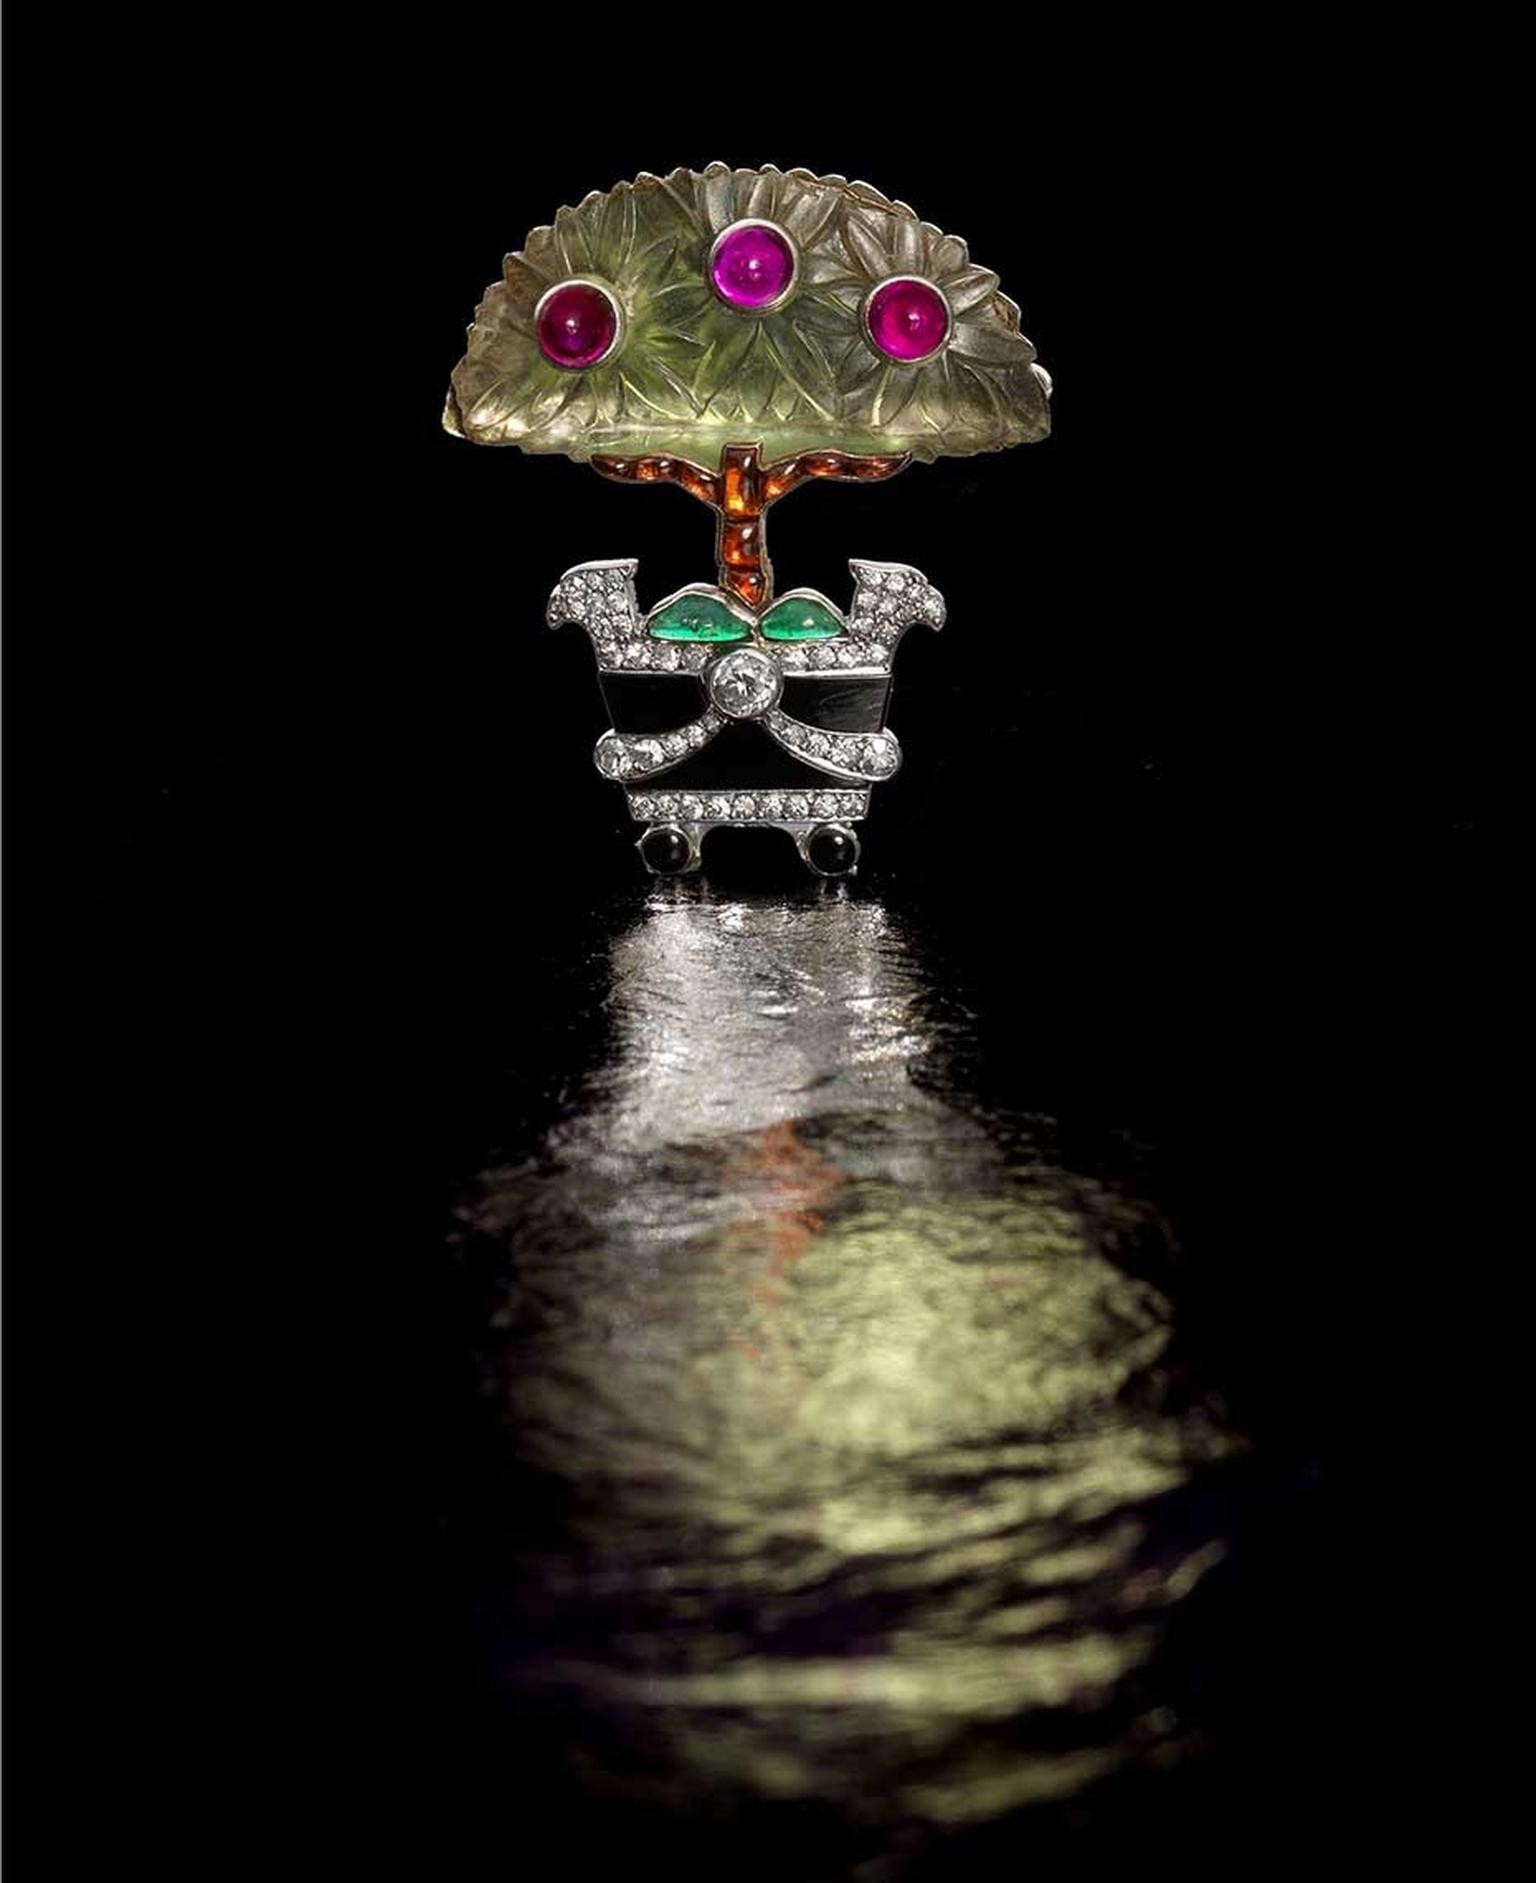 Lot 183, a frosted rock crystal and gem-set Cartier "Orange Tree" brooch dating from 1914, with three cabochon ruby "fruits", a buff-top calibré-cut citrine trunk and cabochon emerald foliage at its base (estimate: £15,000-£20,000)